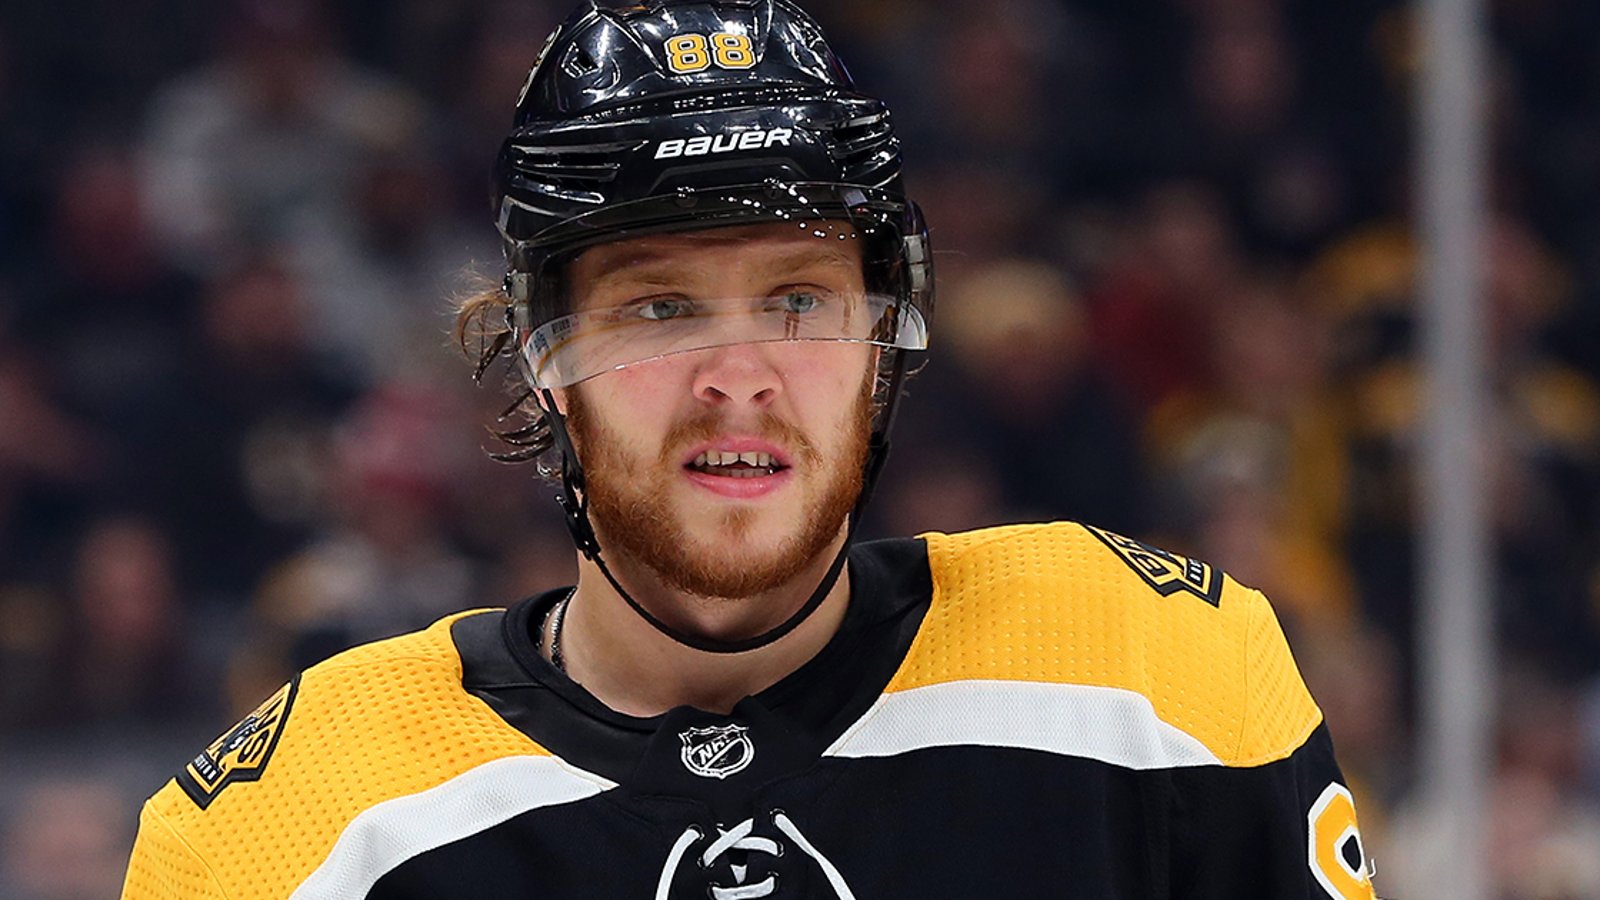 Breaking: Pastrnak slips and falls while out with teammates, will be out weeks!